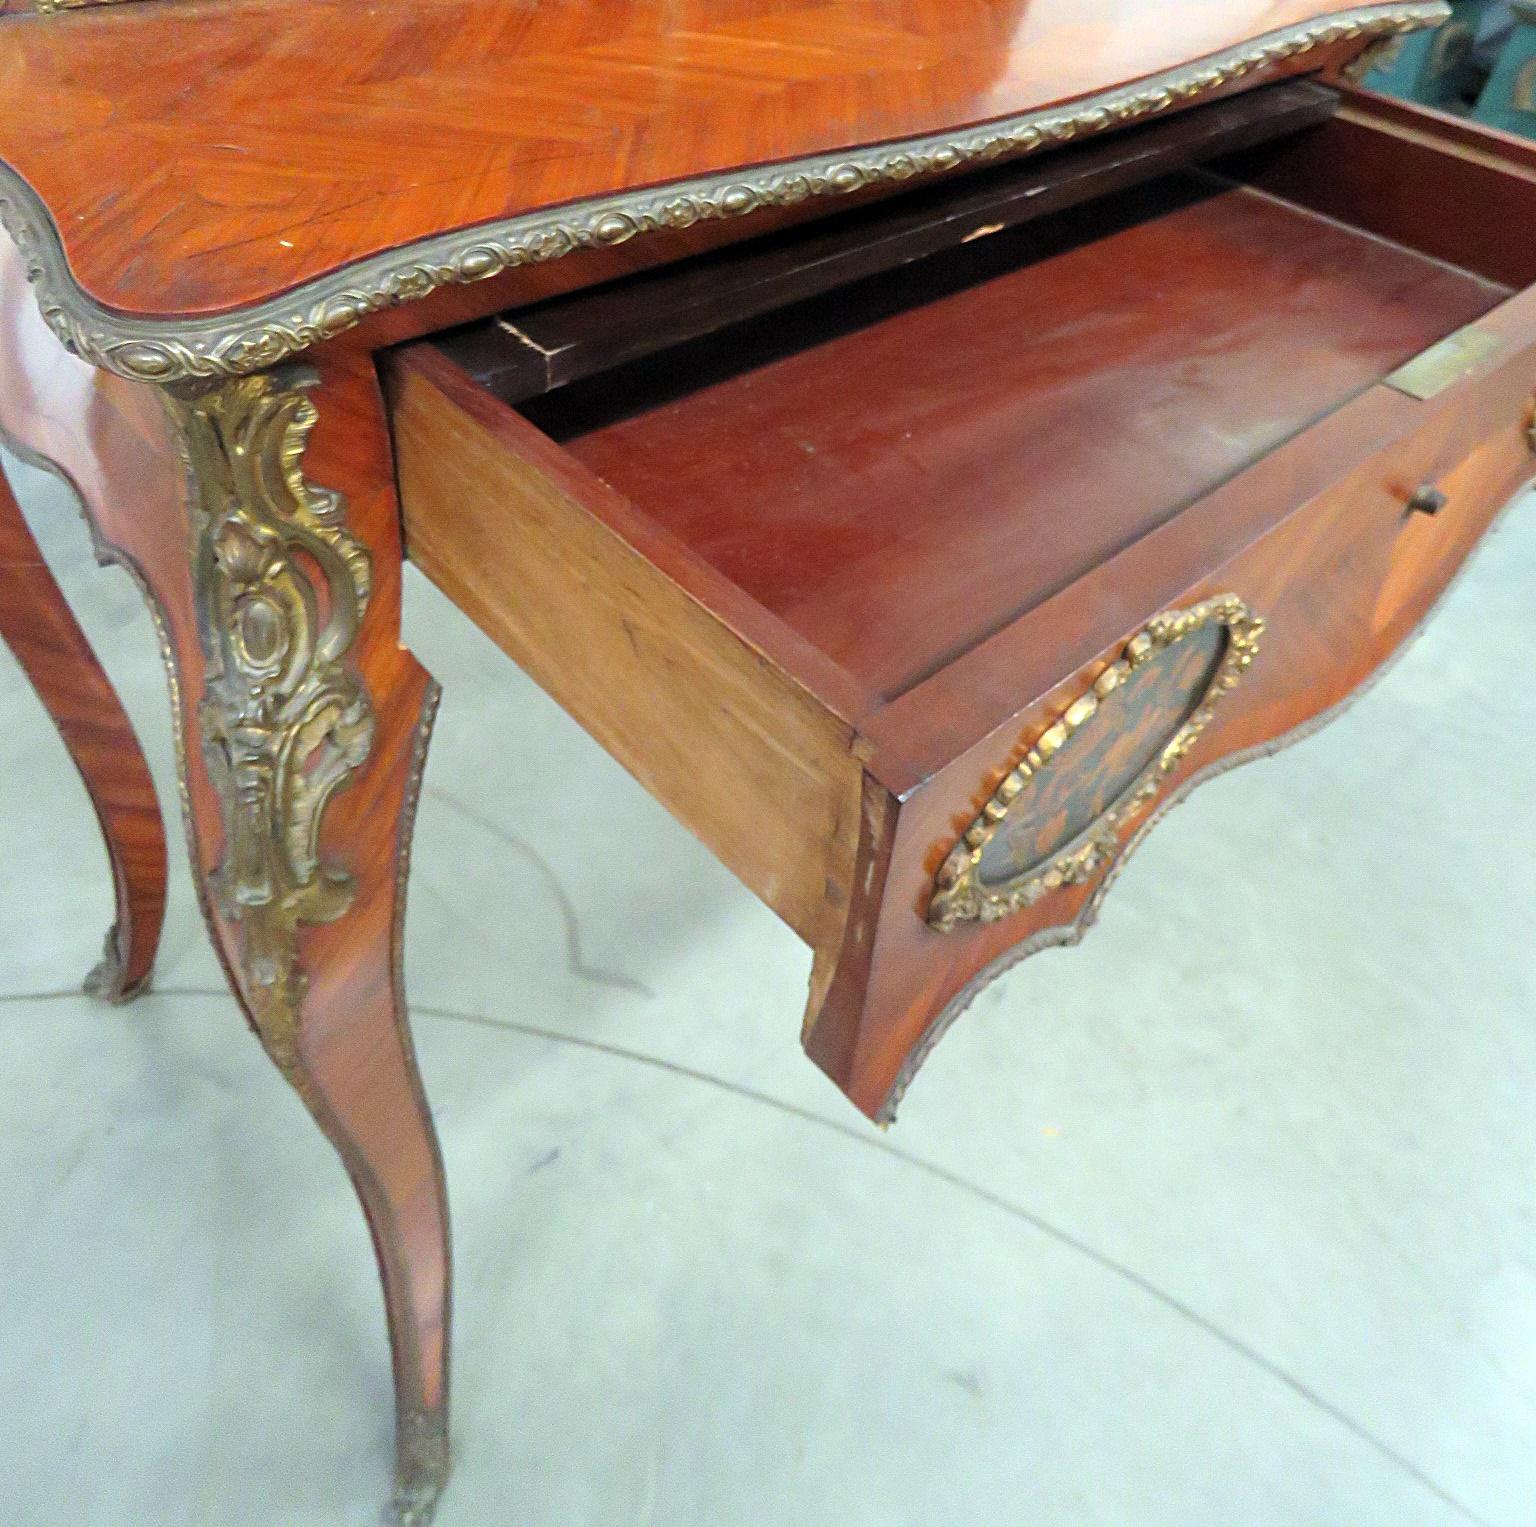 Antique C1870s French Louis XVI Style Inlaid King Wood Ladies Writing Desk For Sale 5